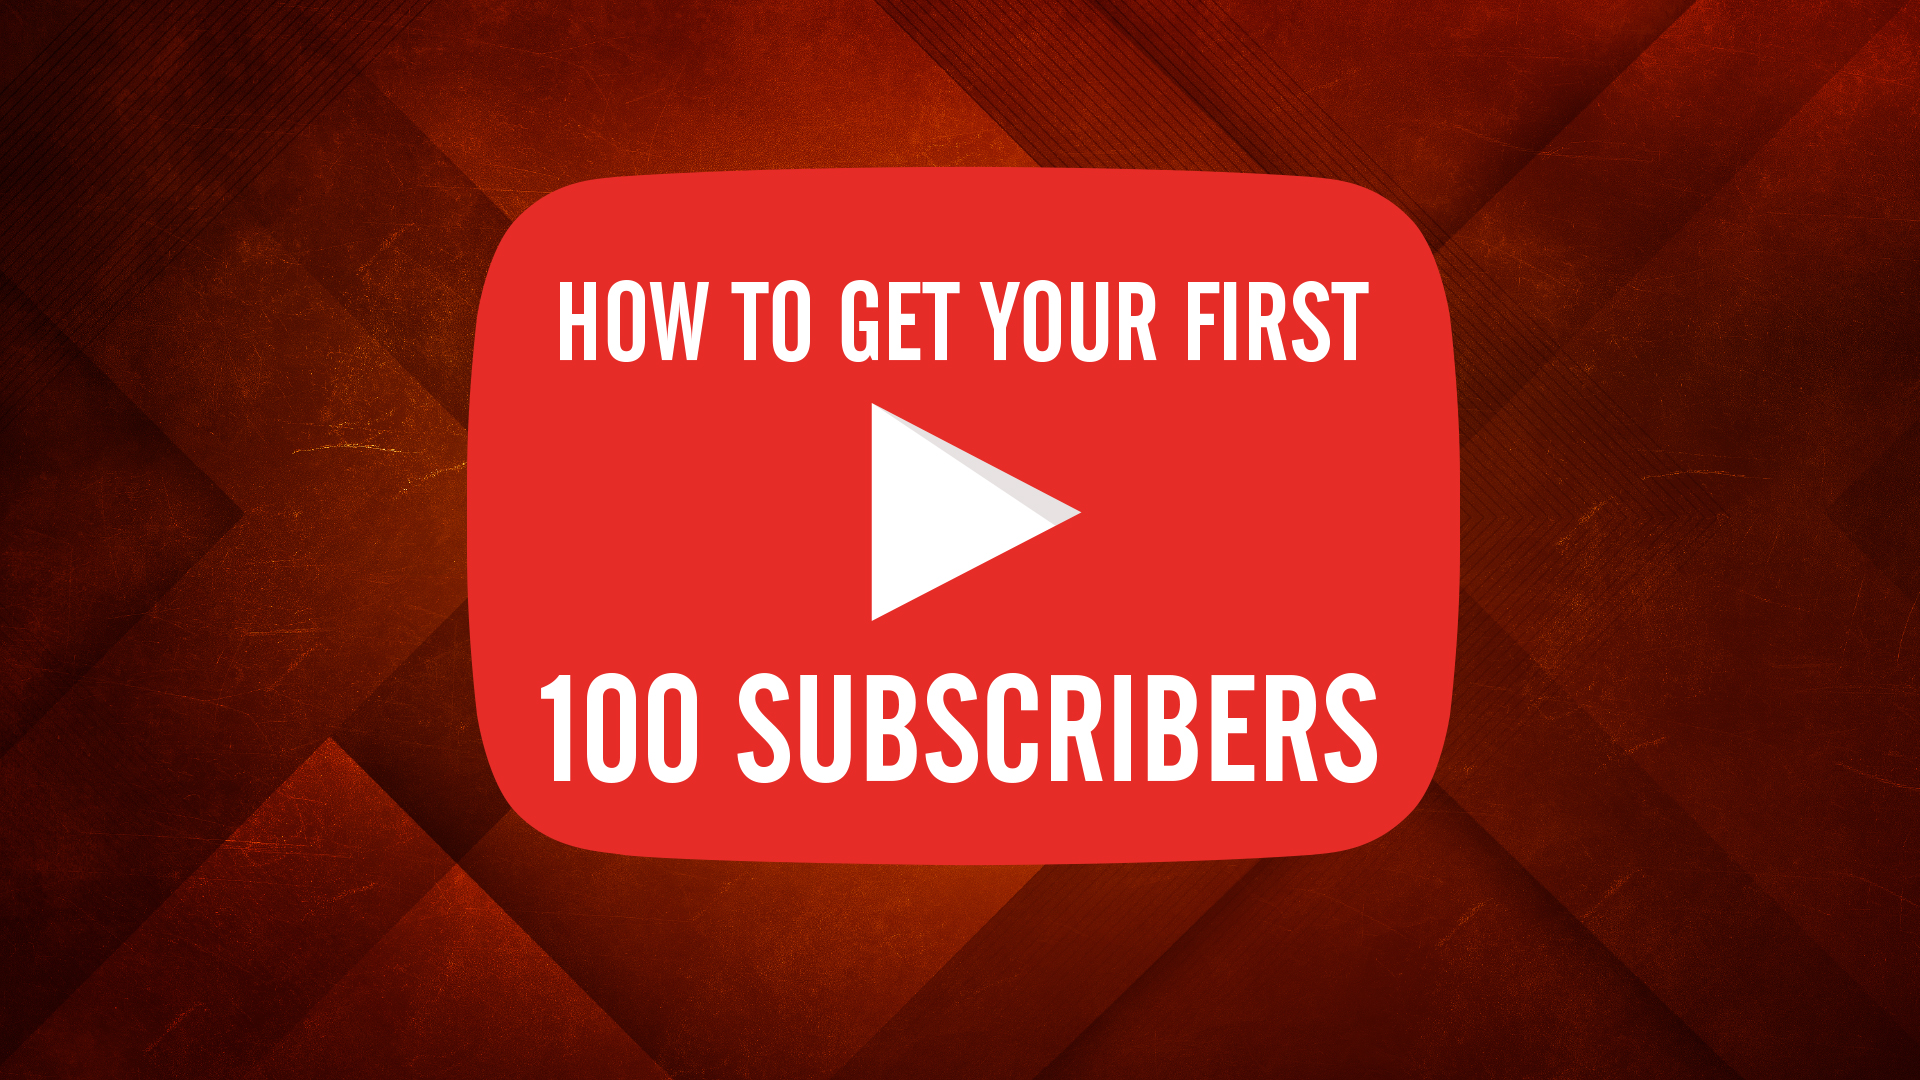 How to get your first 100 customers email